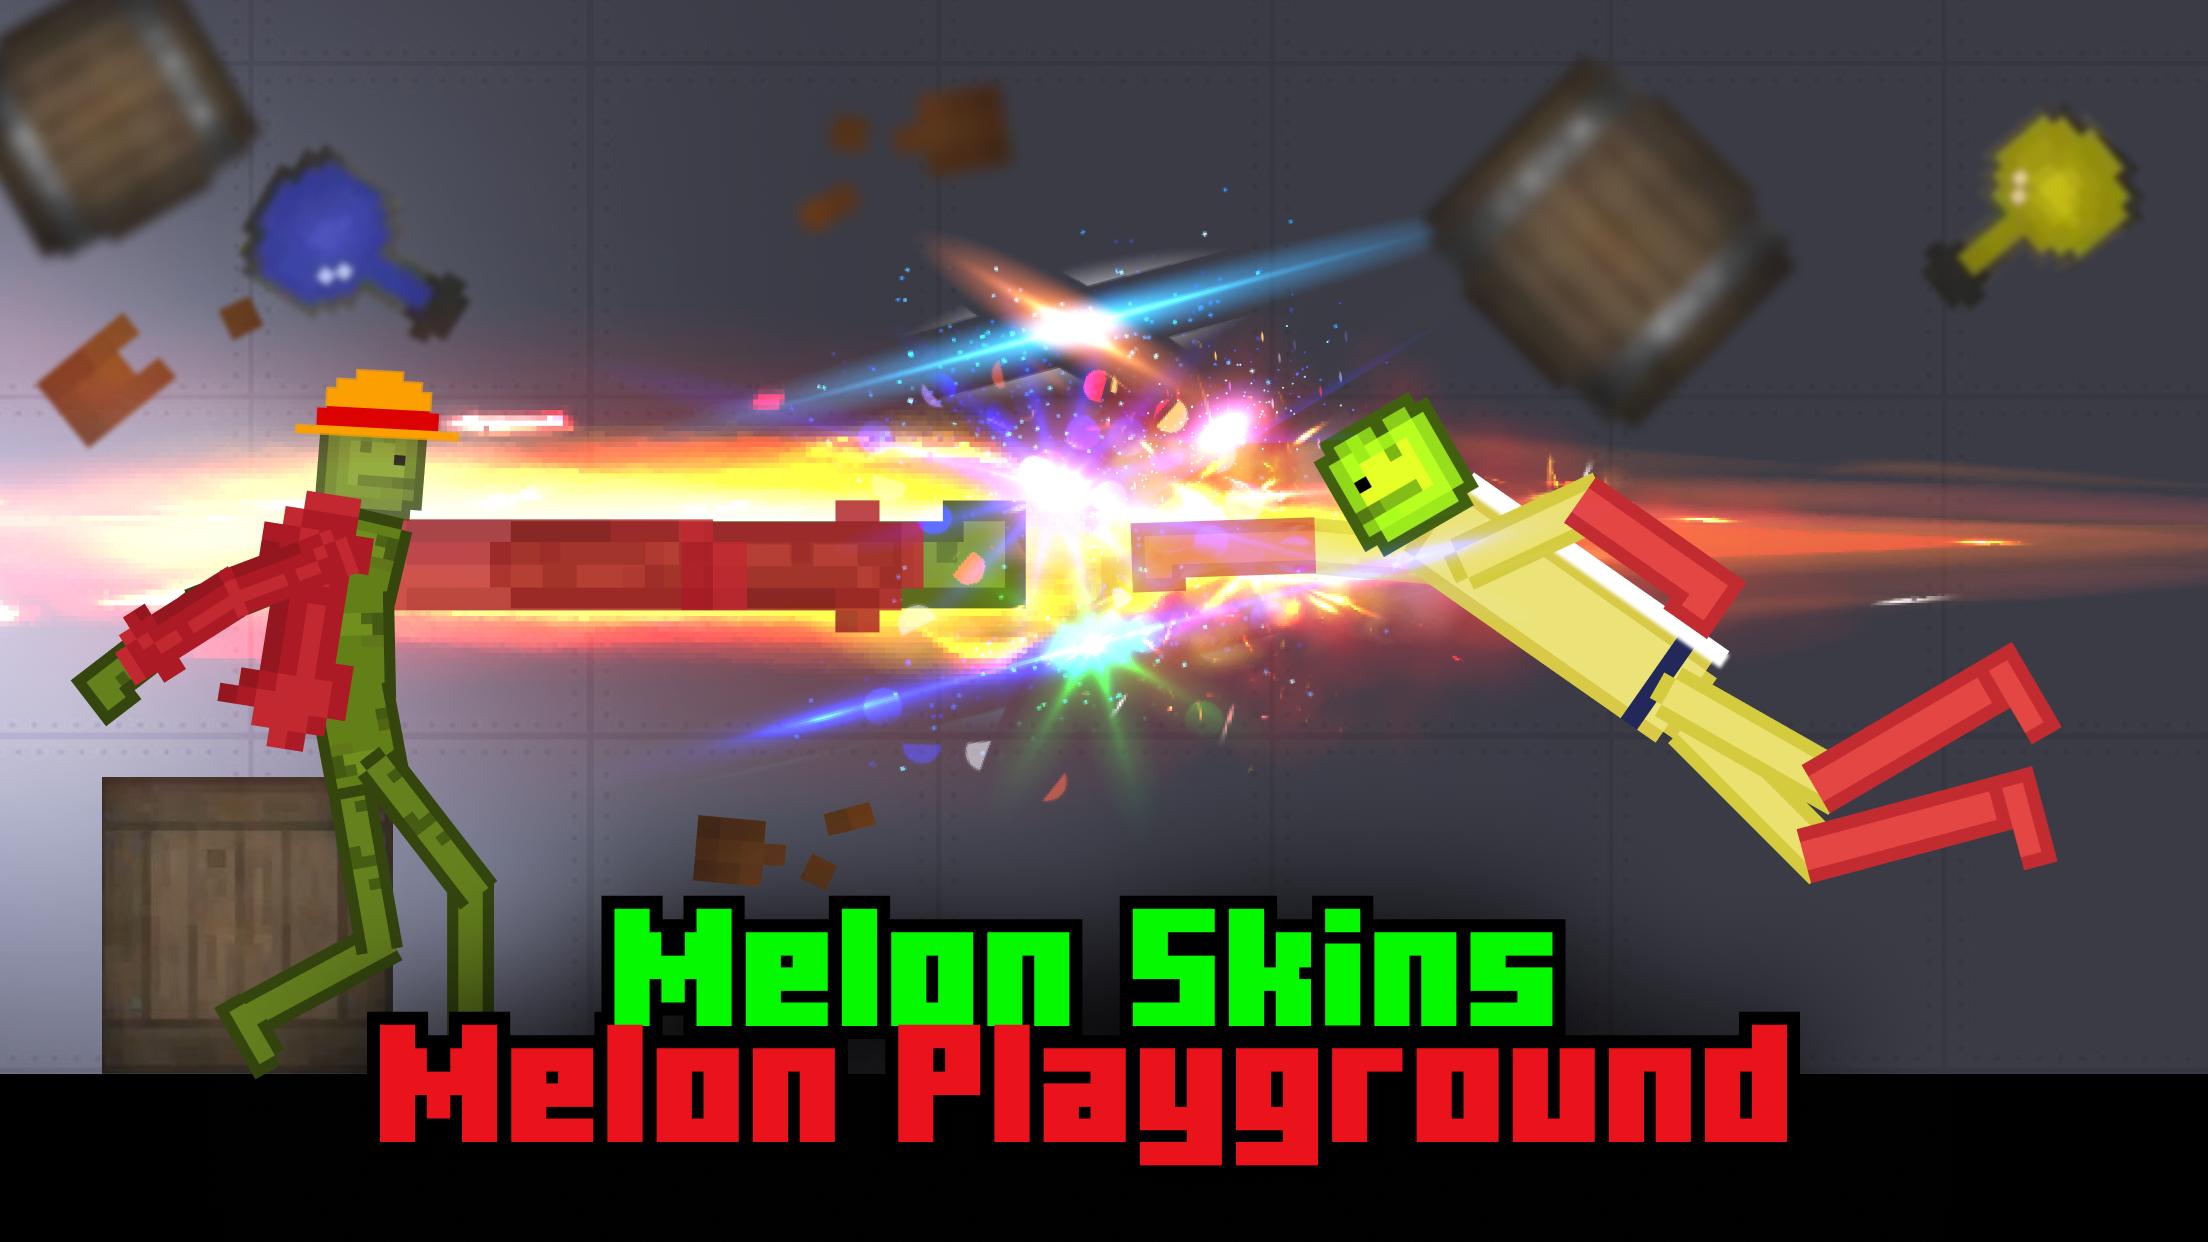 Melon Playground for PC 🎮 Download Melon Playground Game for Free